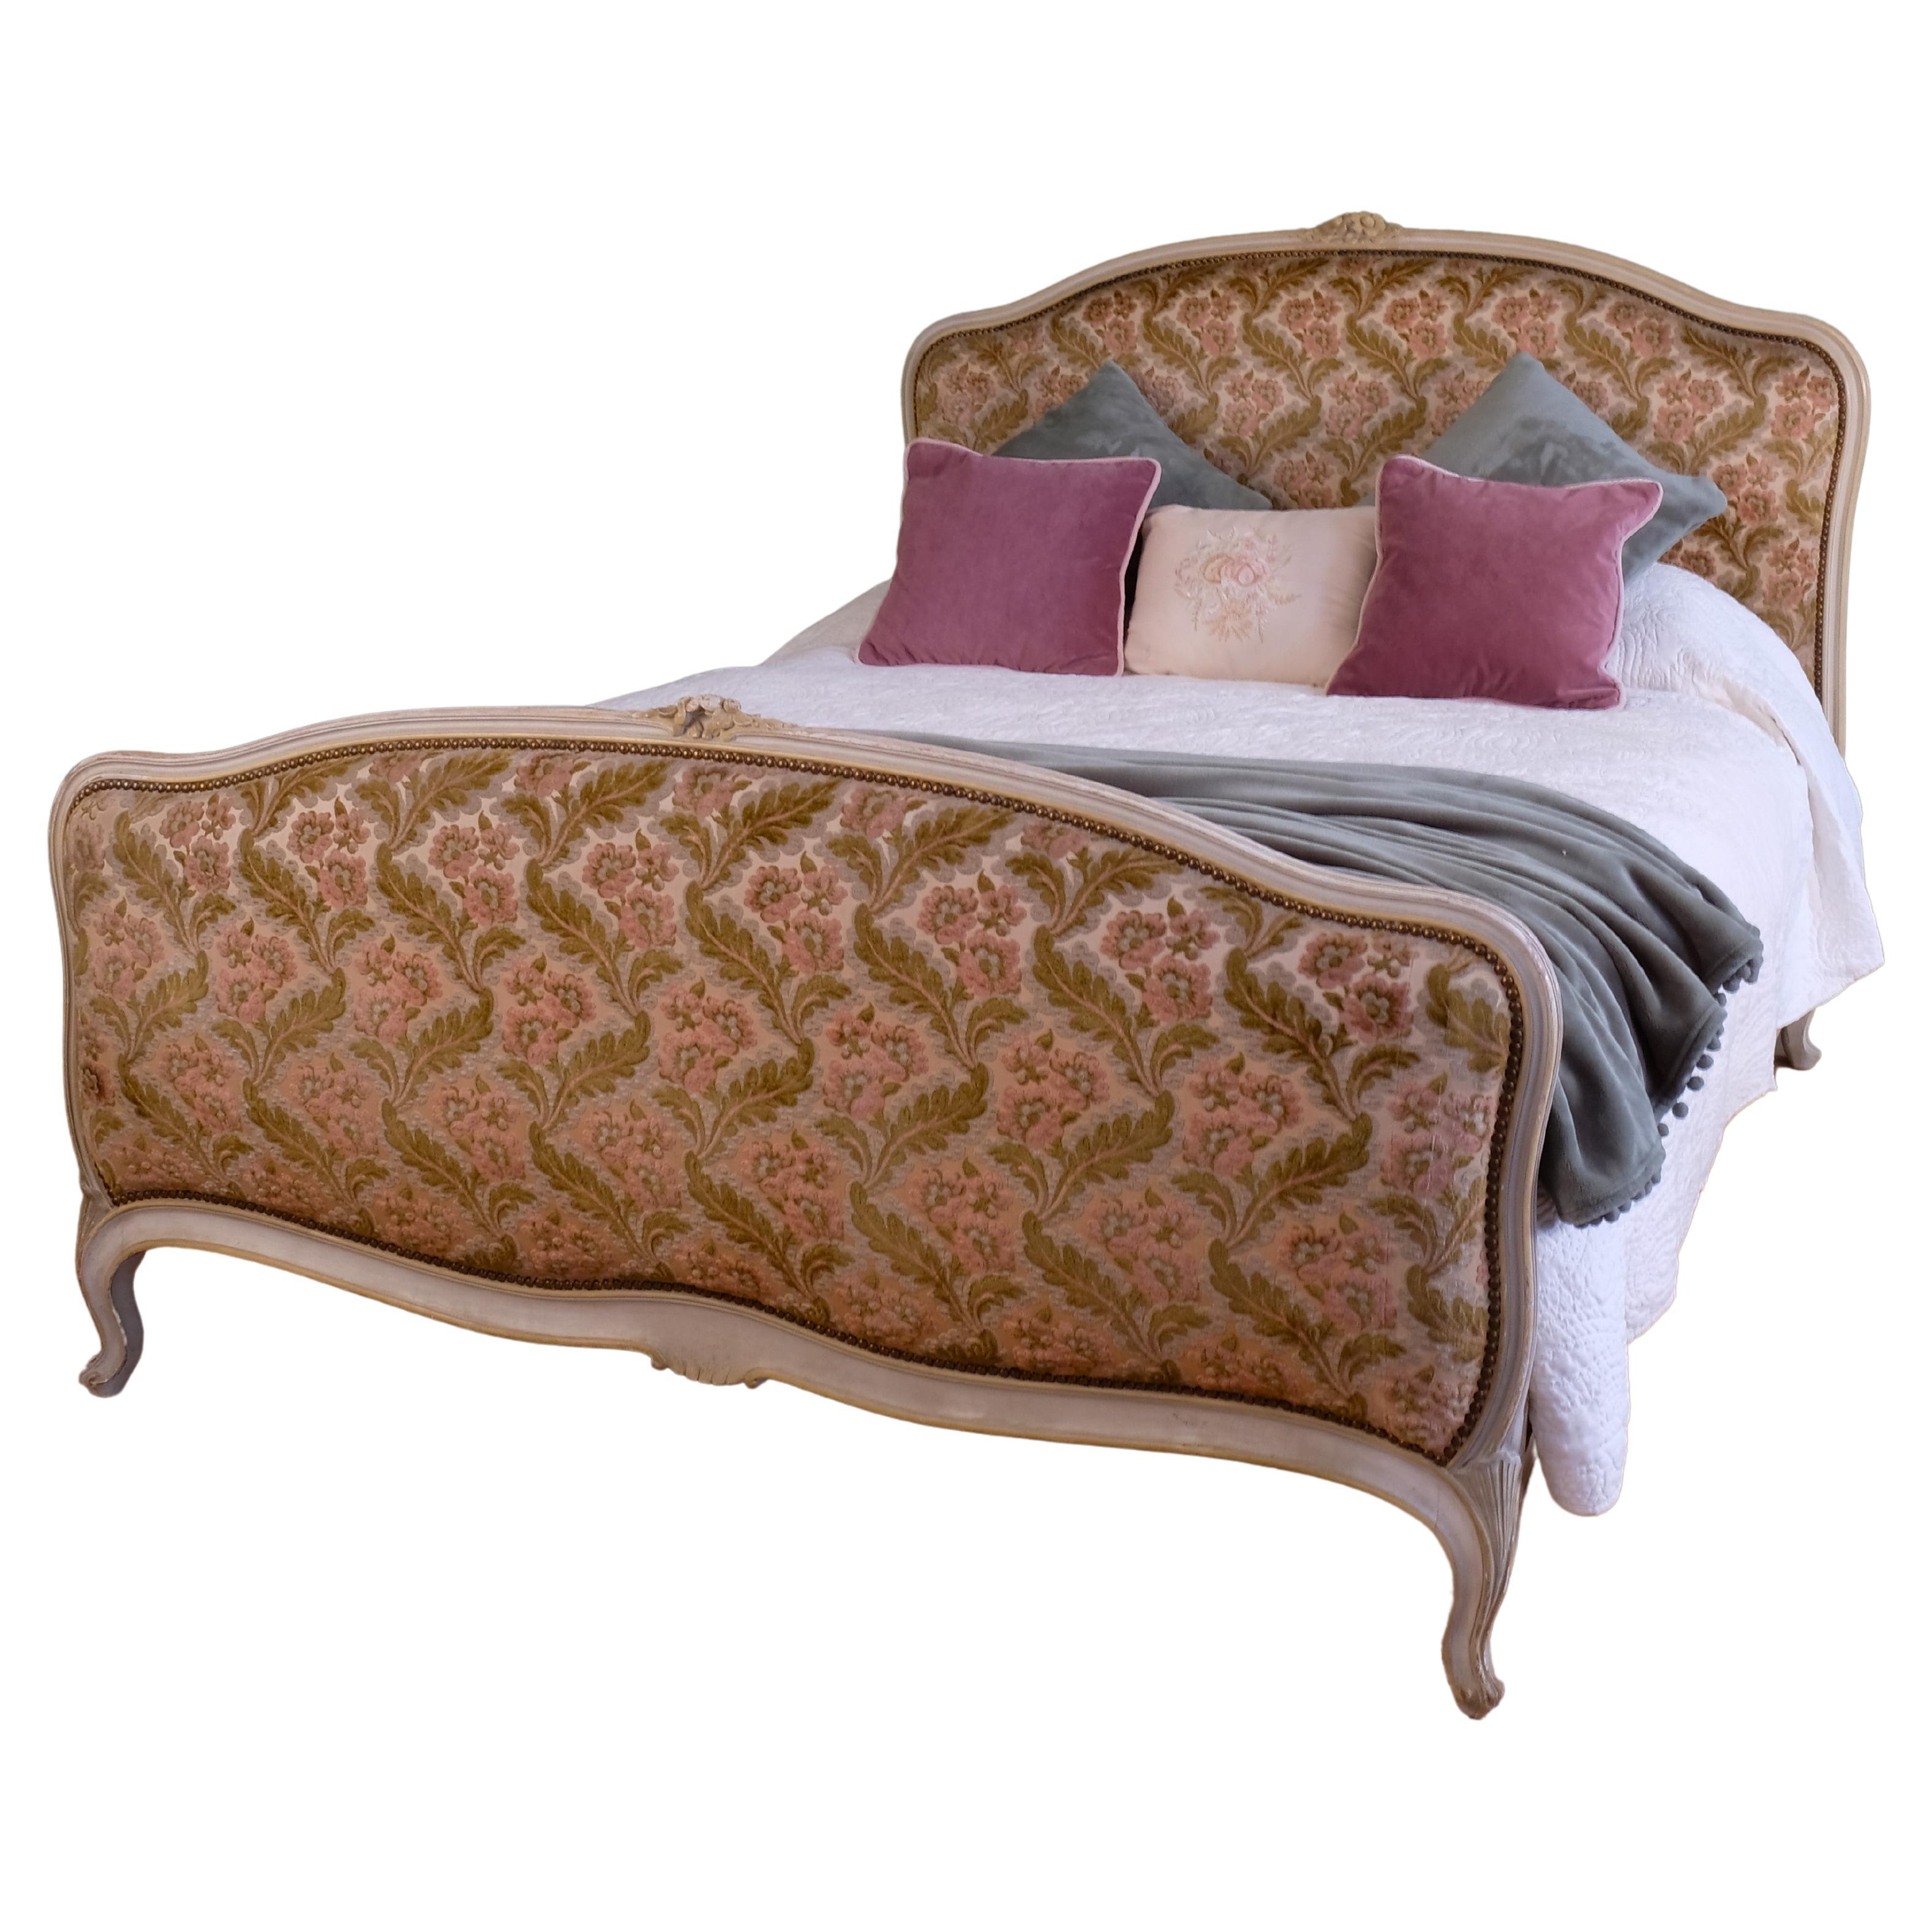 Double, Antique French Upholstered Bed For Sale